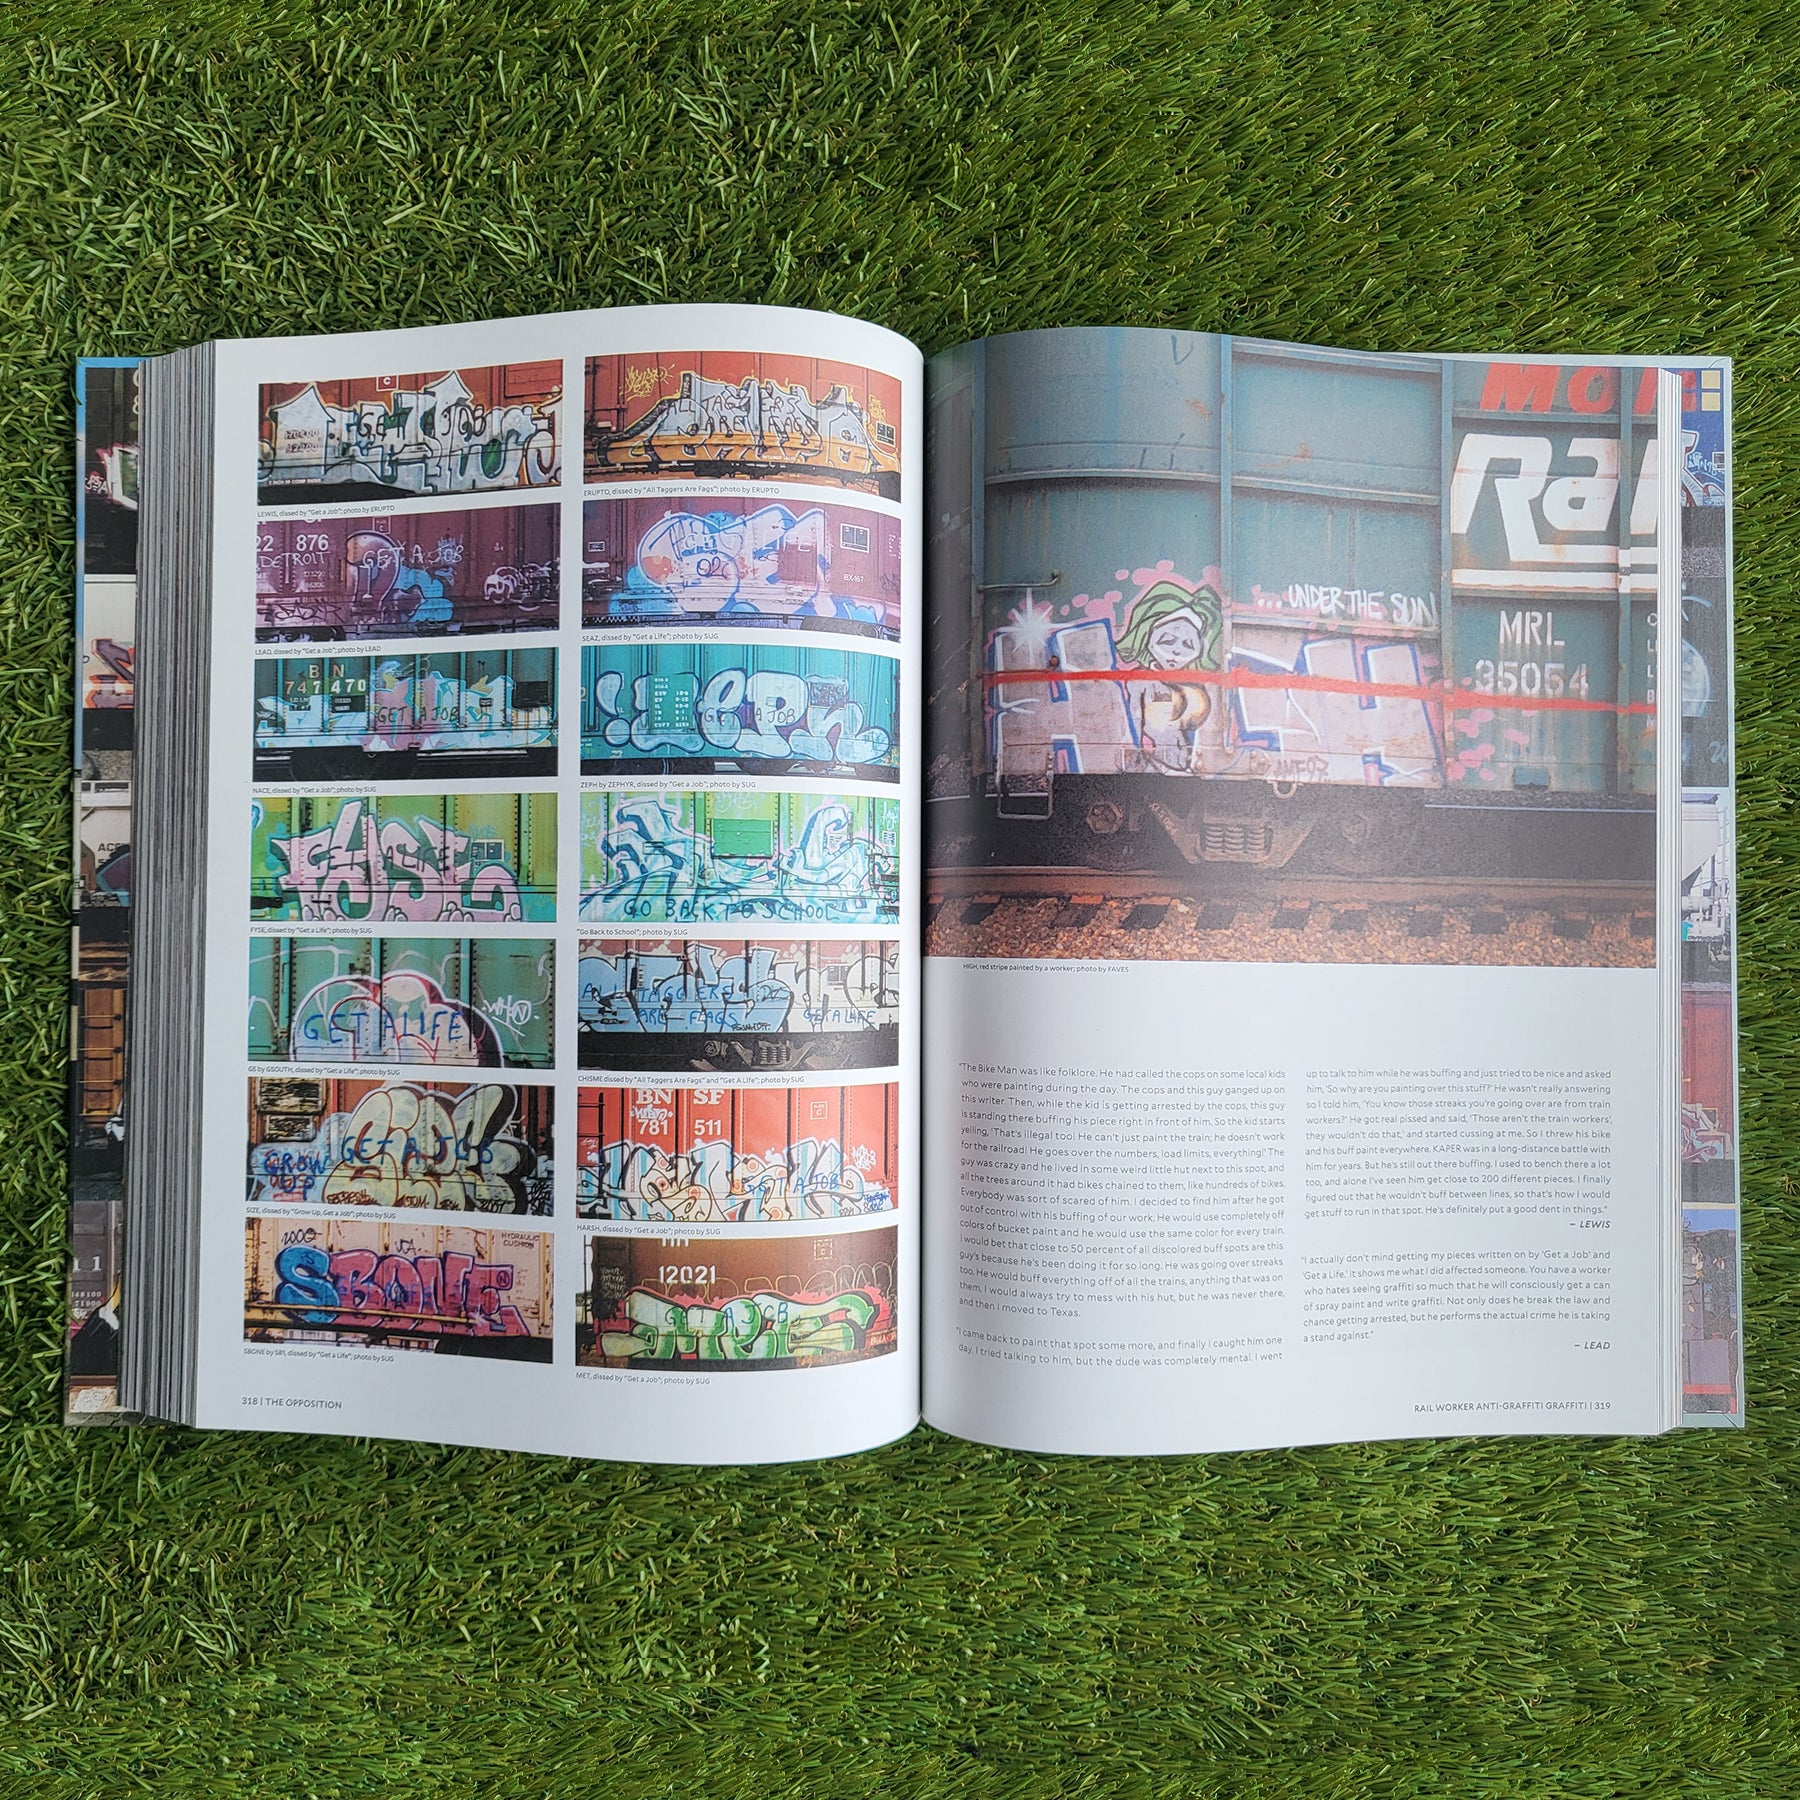 An open, hardcover book, the right page shows a photo of graffiti writing on a train at the top with unreadable writing at the bottom. The left page is a collage of different trains with graffiti on them. The book is laying on a grass background